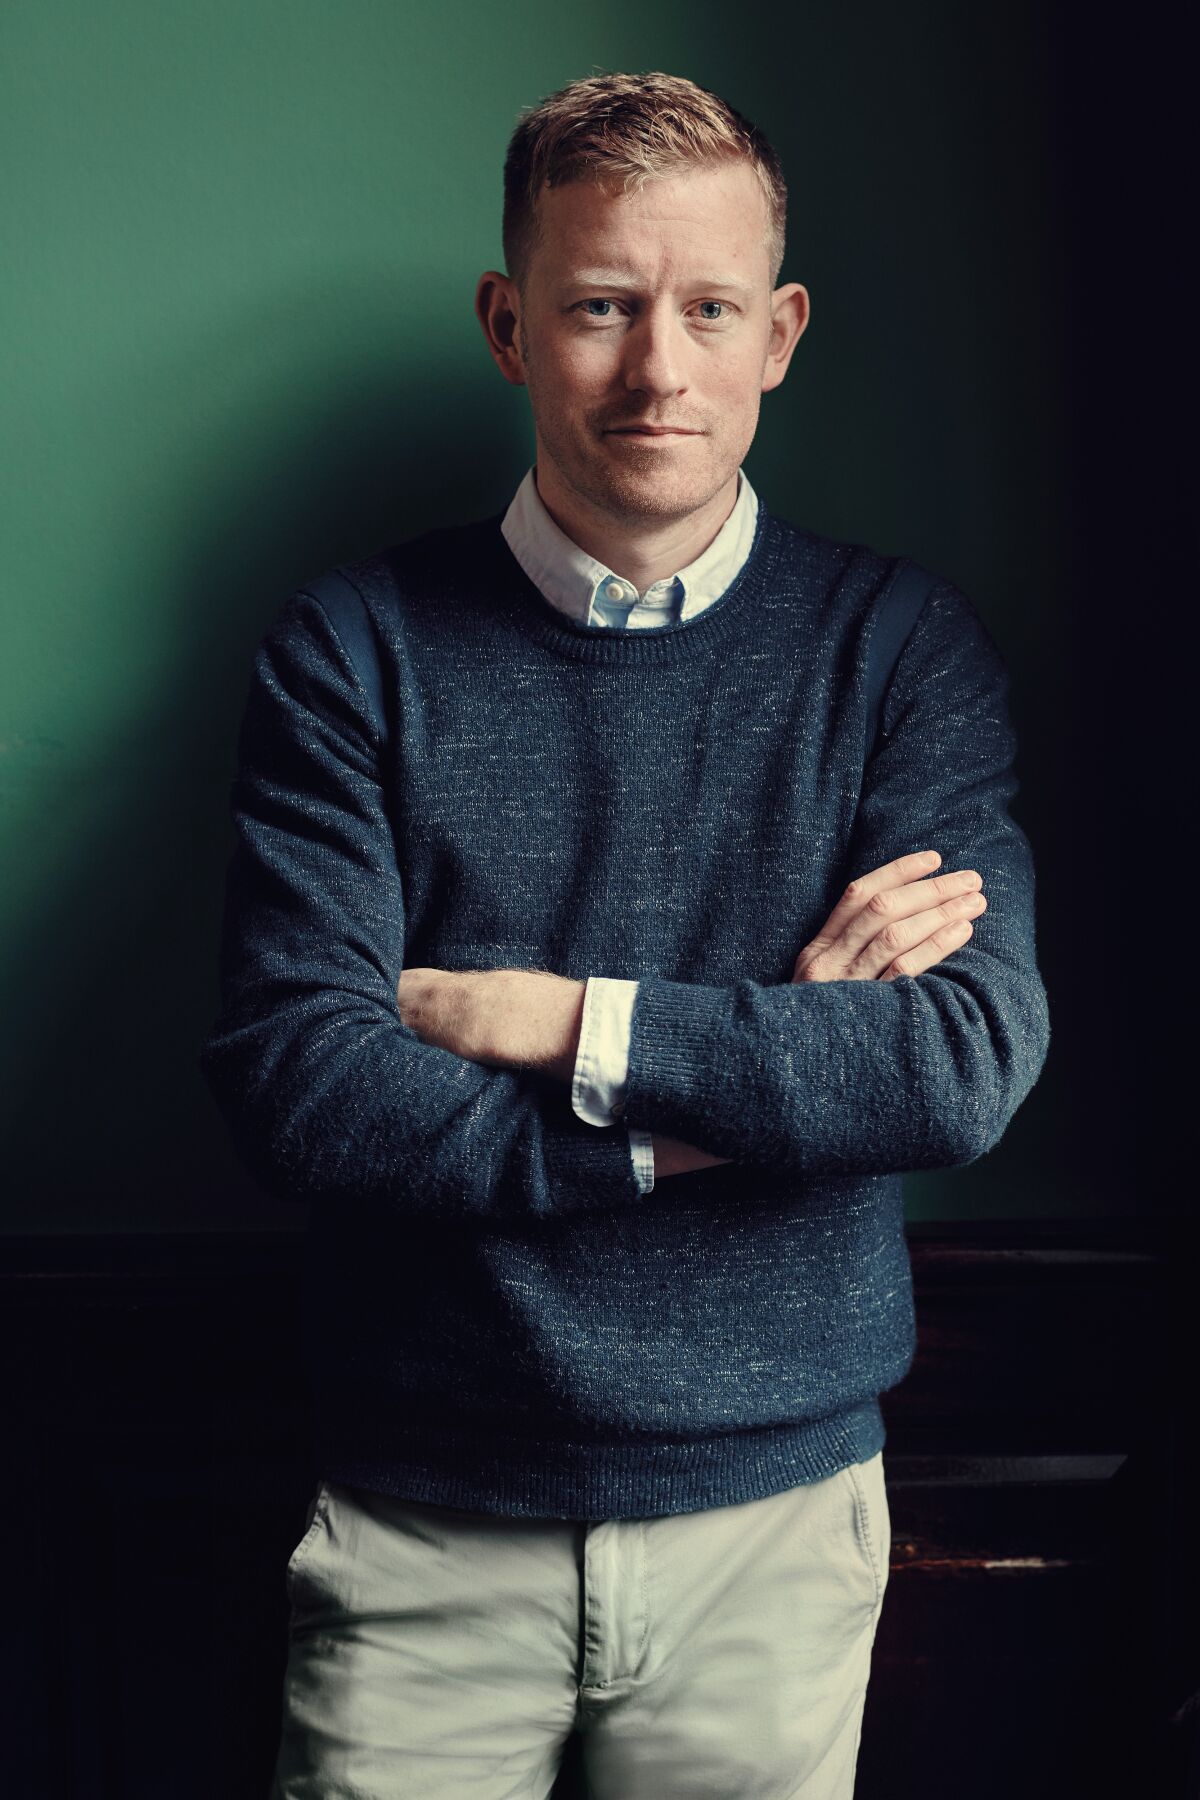 A man in a navy blue sweater folds his arms.